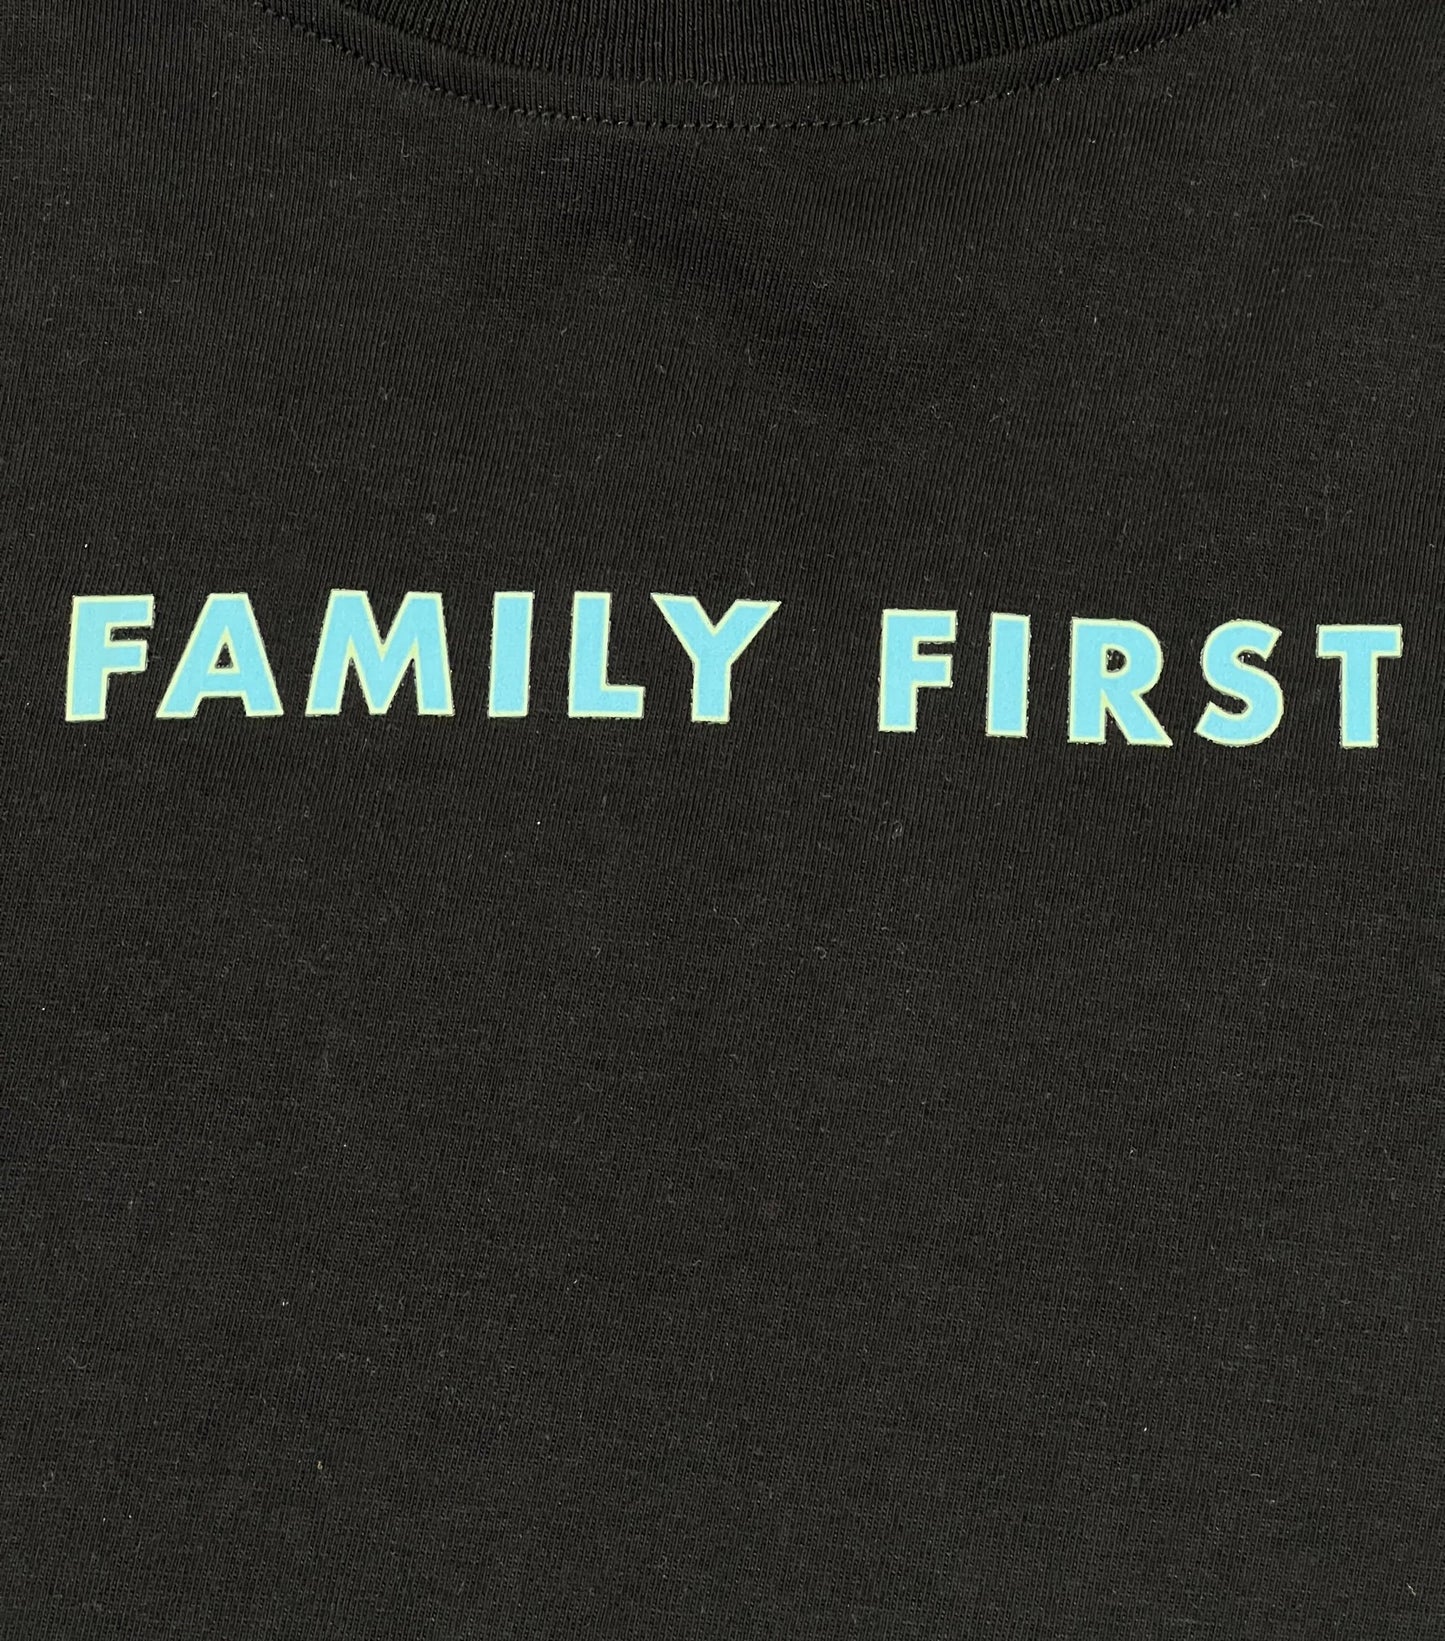 A black graphic FAMILY FIRST t-shirt with the word "family first" on it, made from 100% cotton.